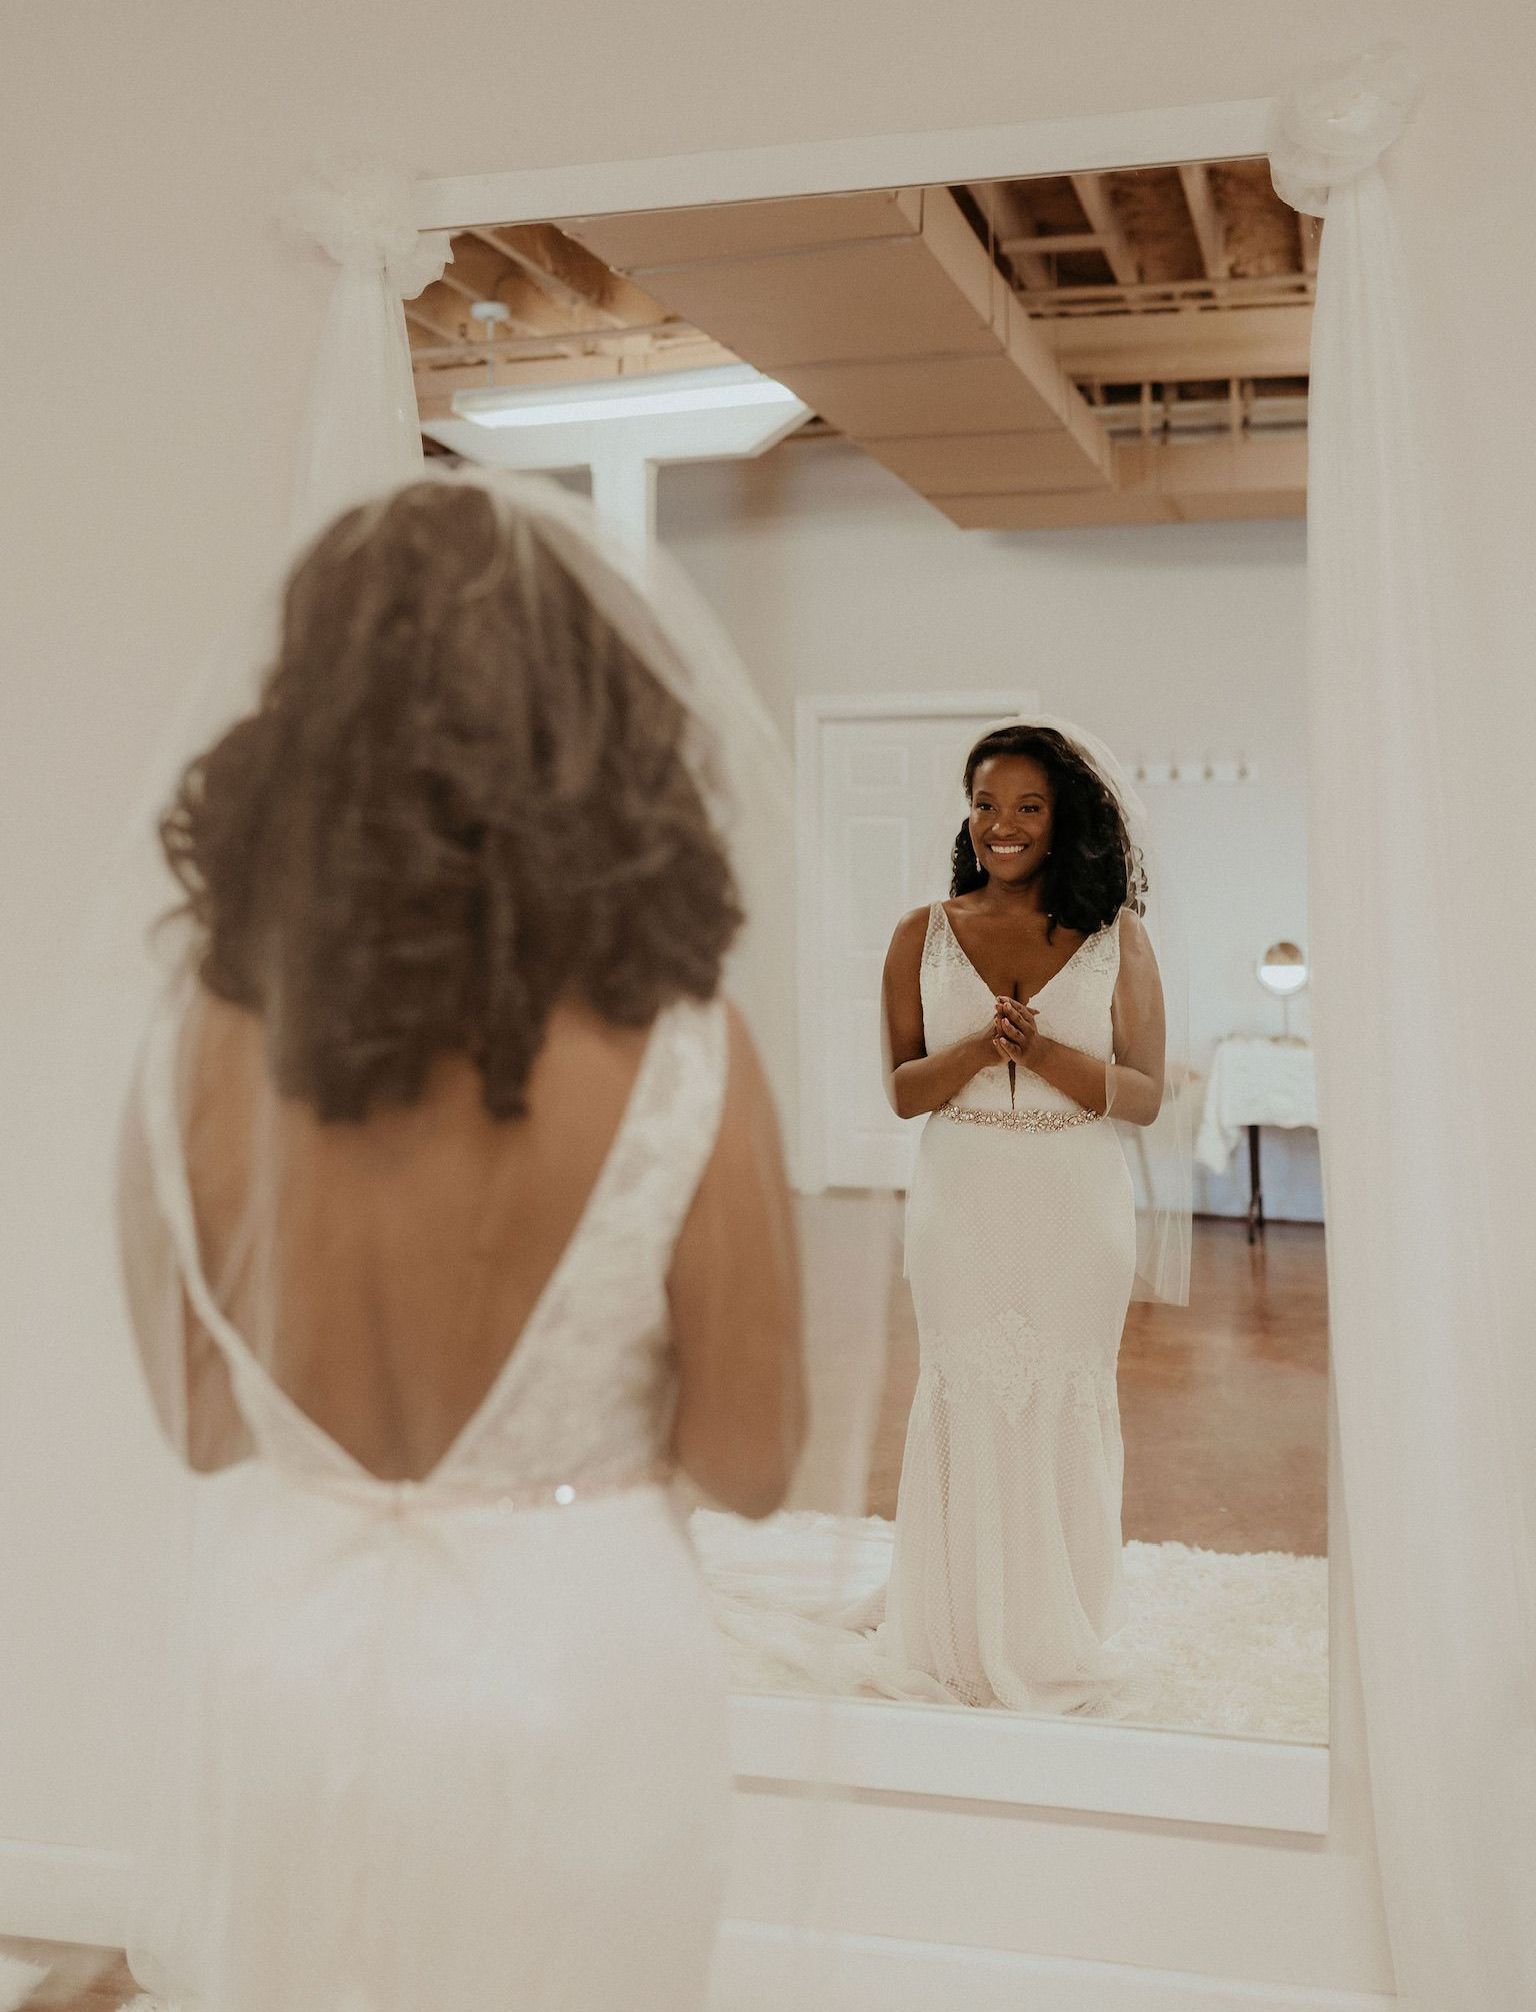 a woman in a wedding dress is standing in front of a mirror smiling.